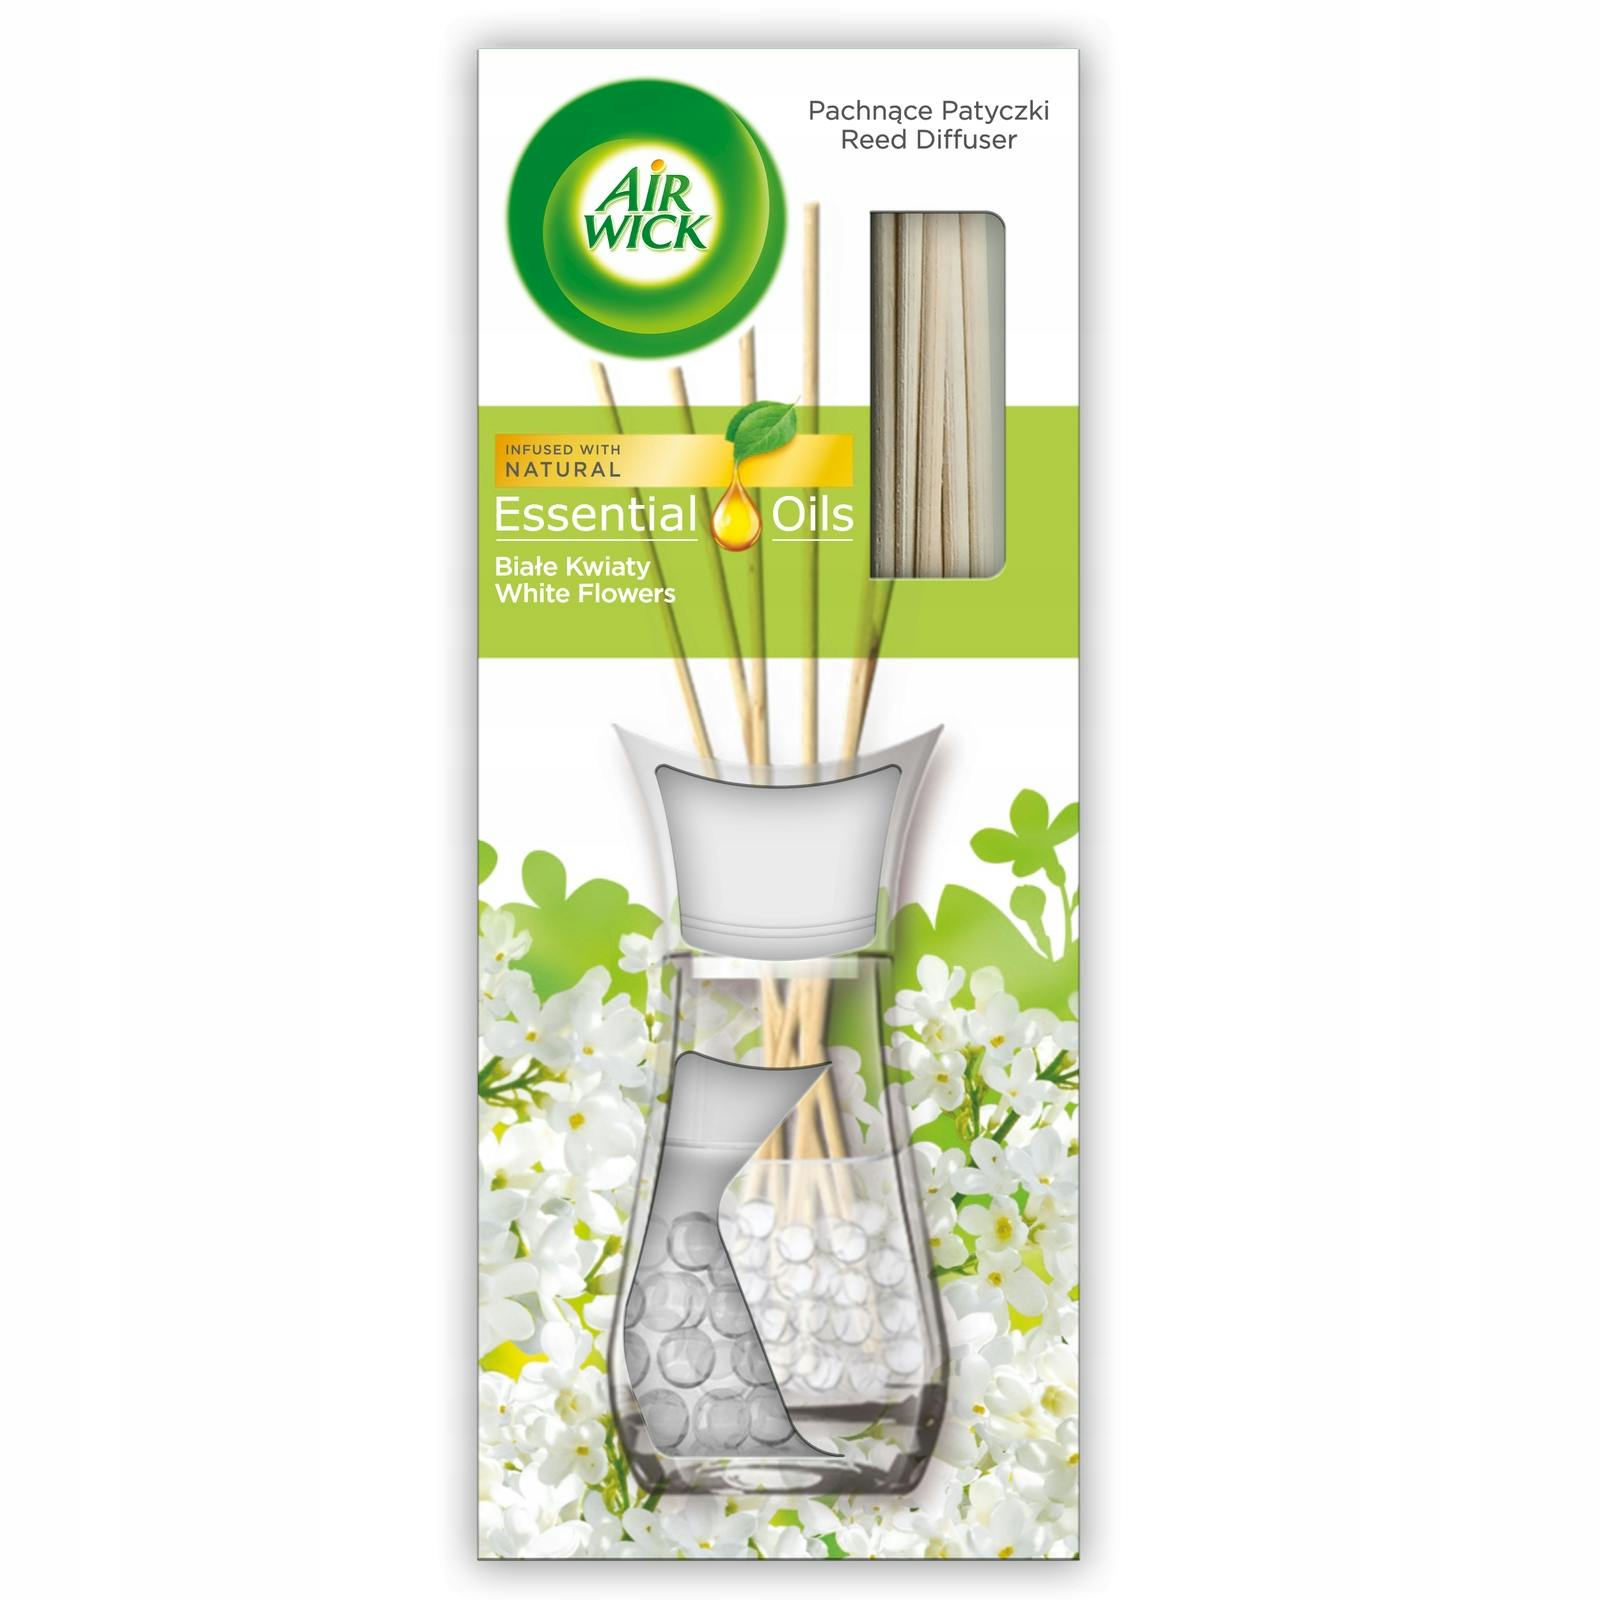 Air Wick Reed Diffuser White Flowers 25 ml